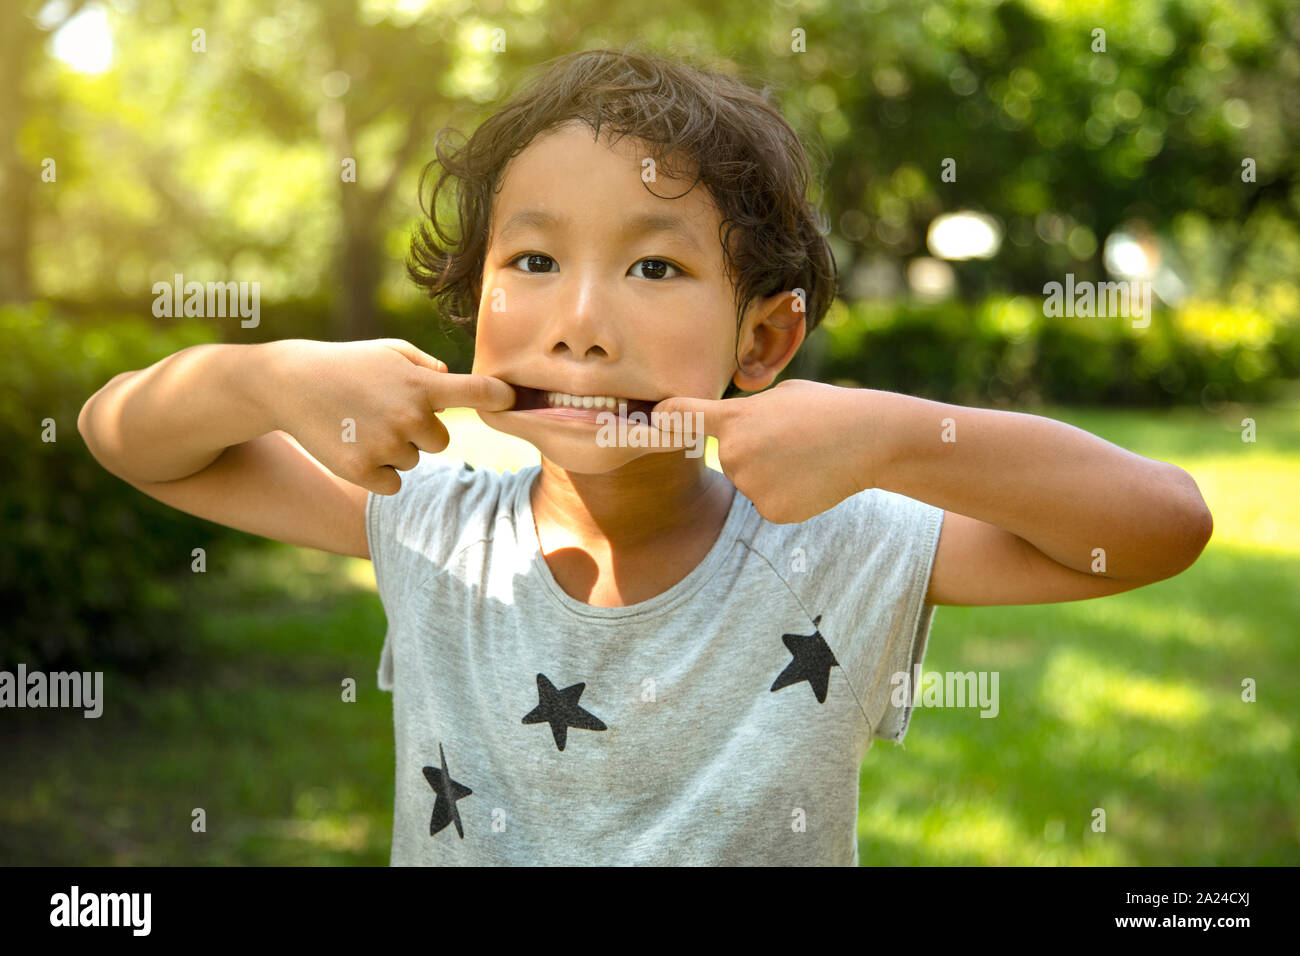 little boy making a funny face Stock Photo